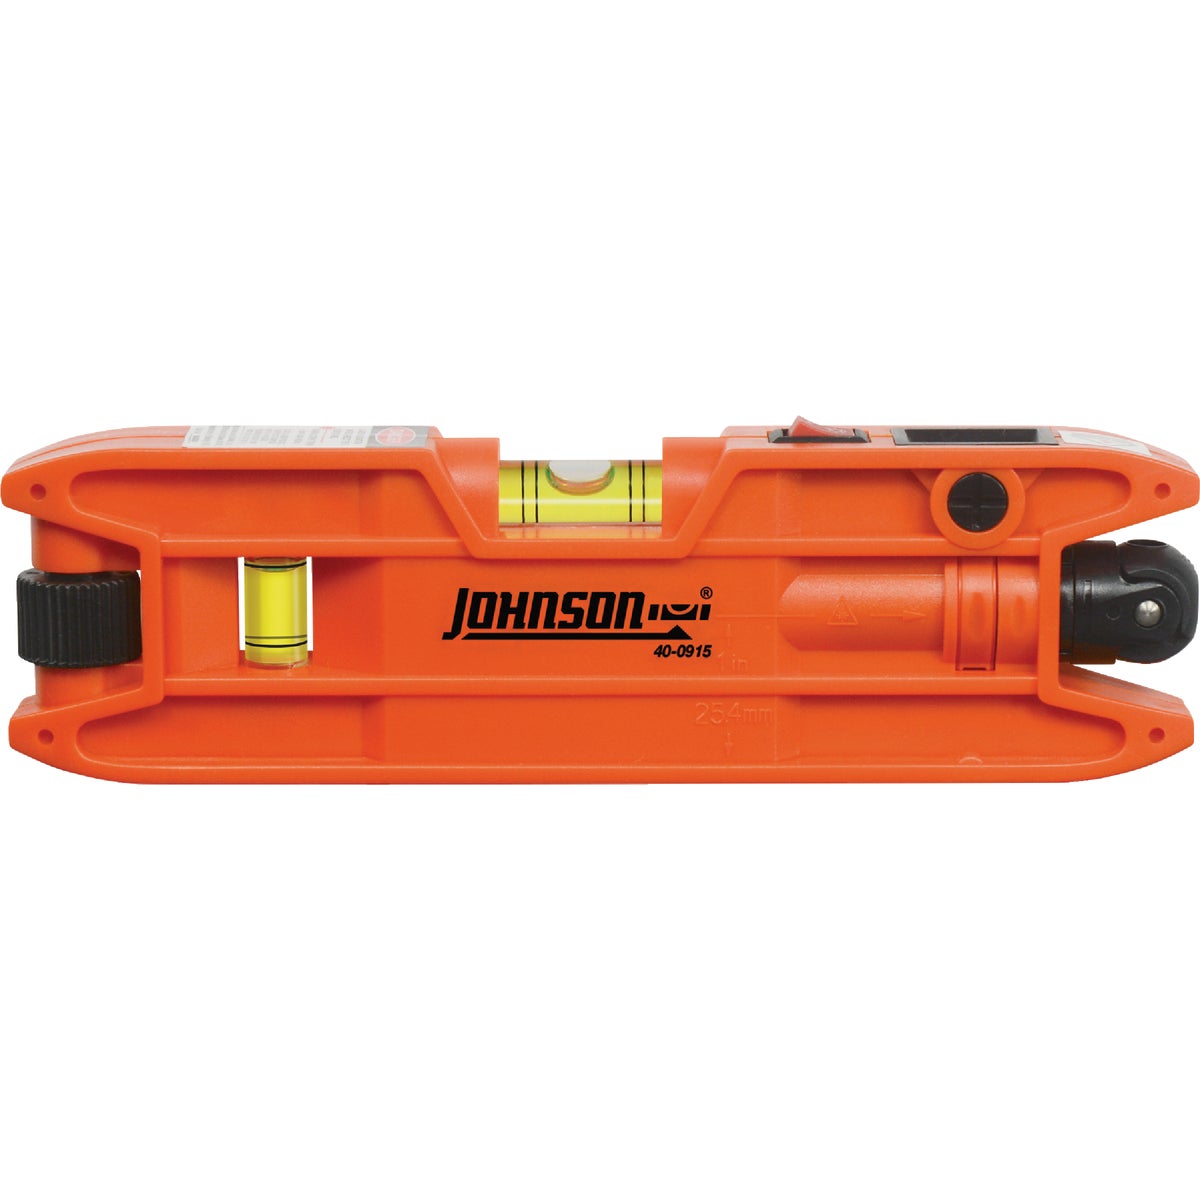 Item 365076, This magnetic torpedo laser level is a must-have at home or on the job.